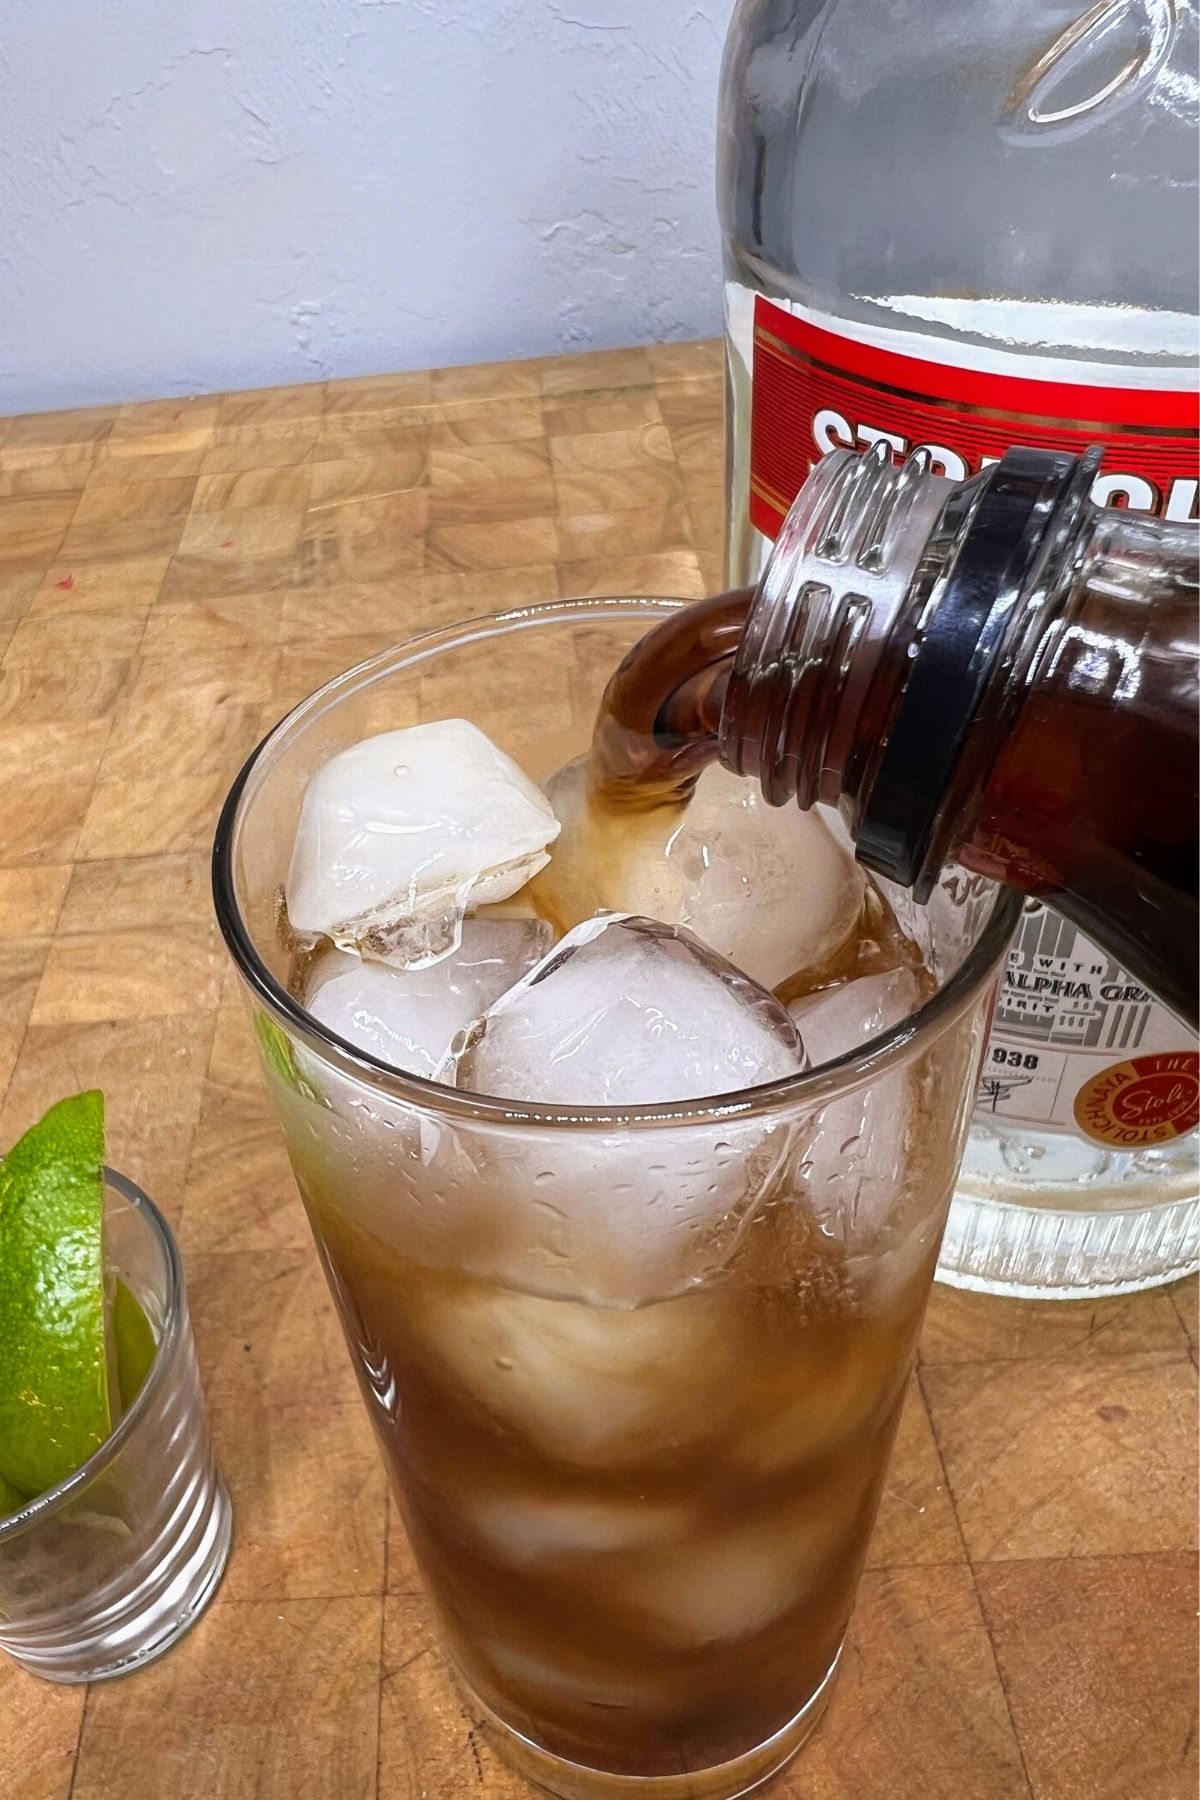 Pouring coke into a highball glass with vodka.